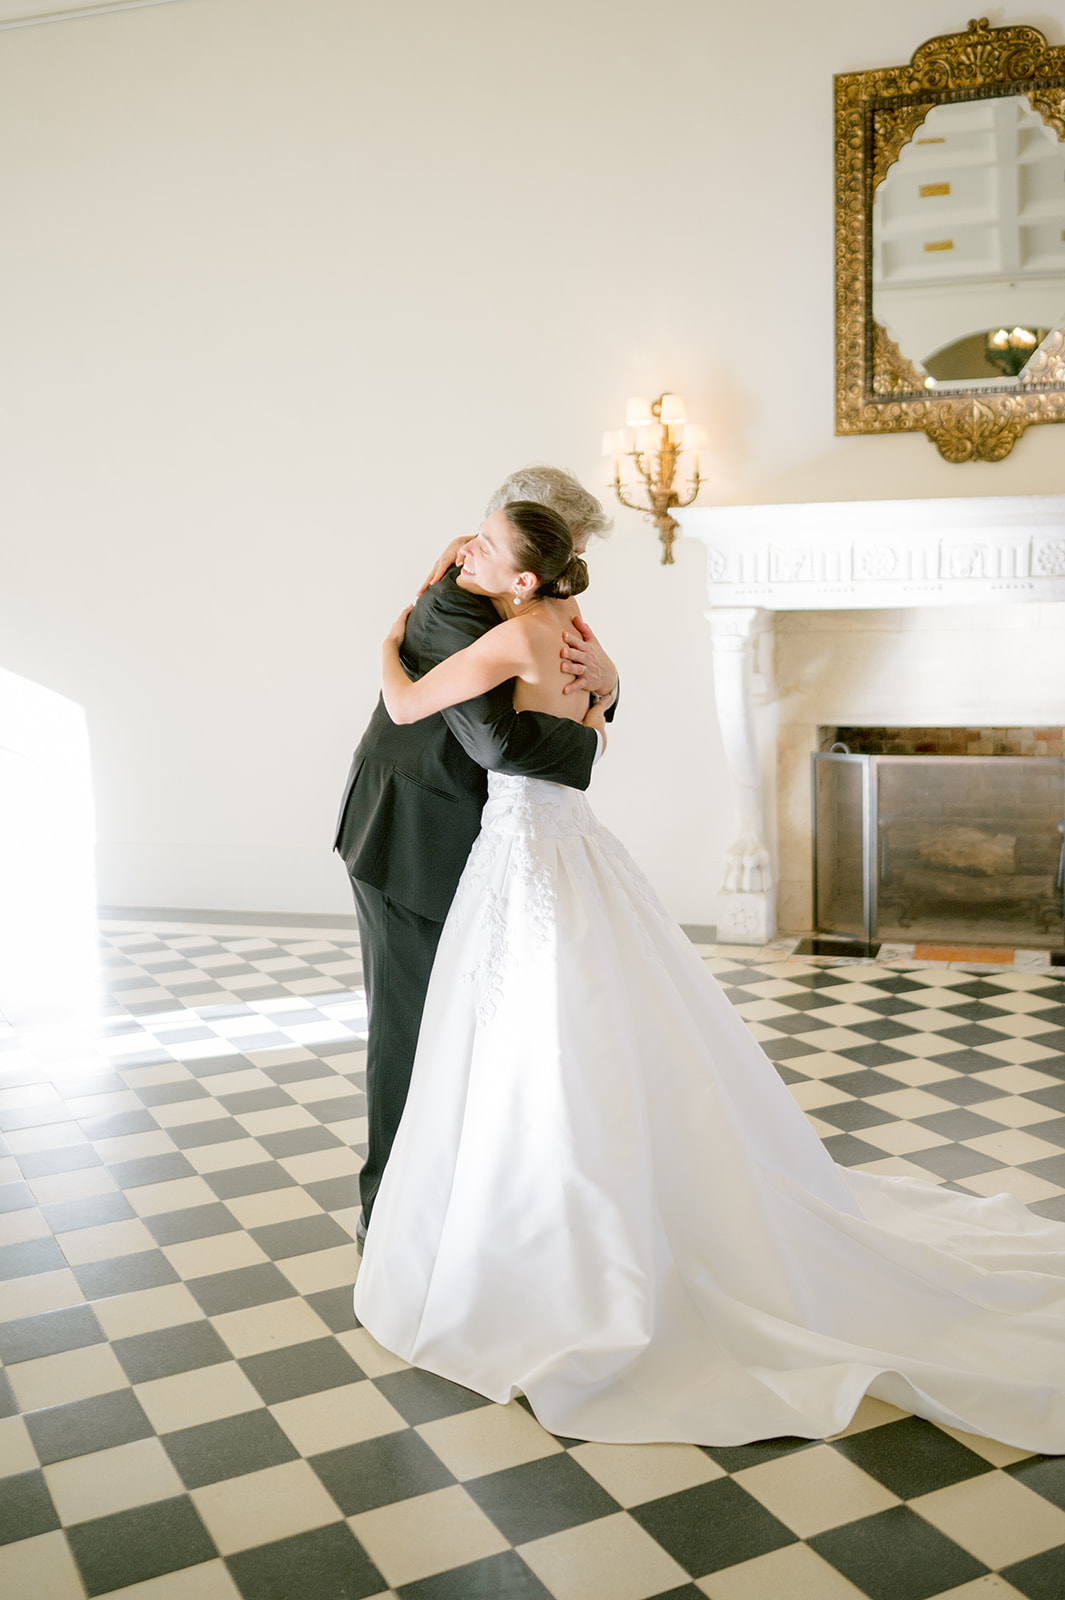 Candid wedding photography at Deering Estate in Miami Florida
